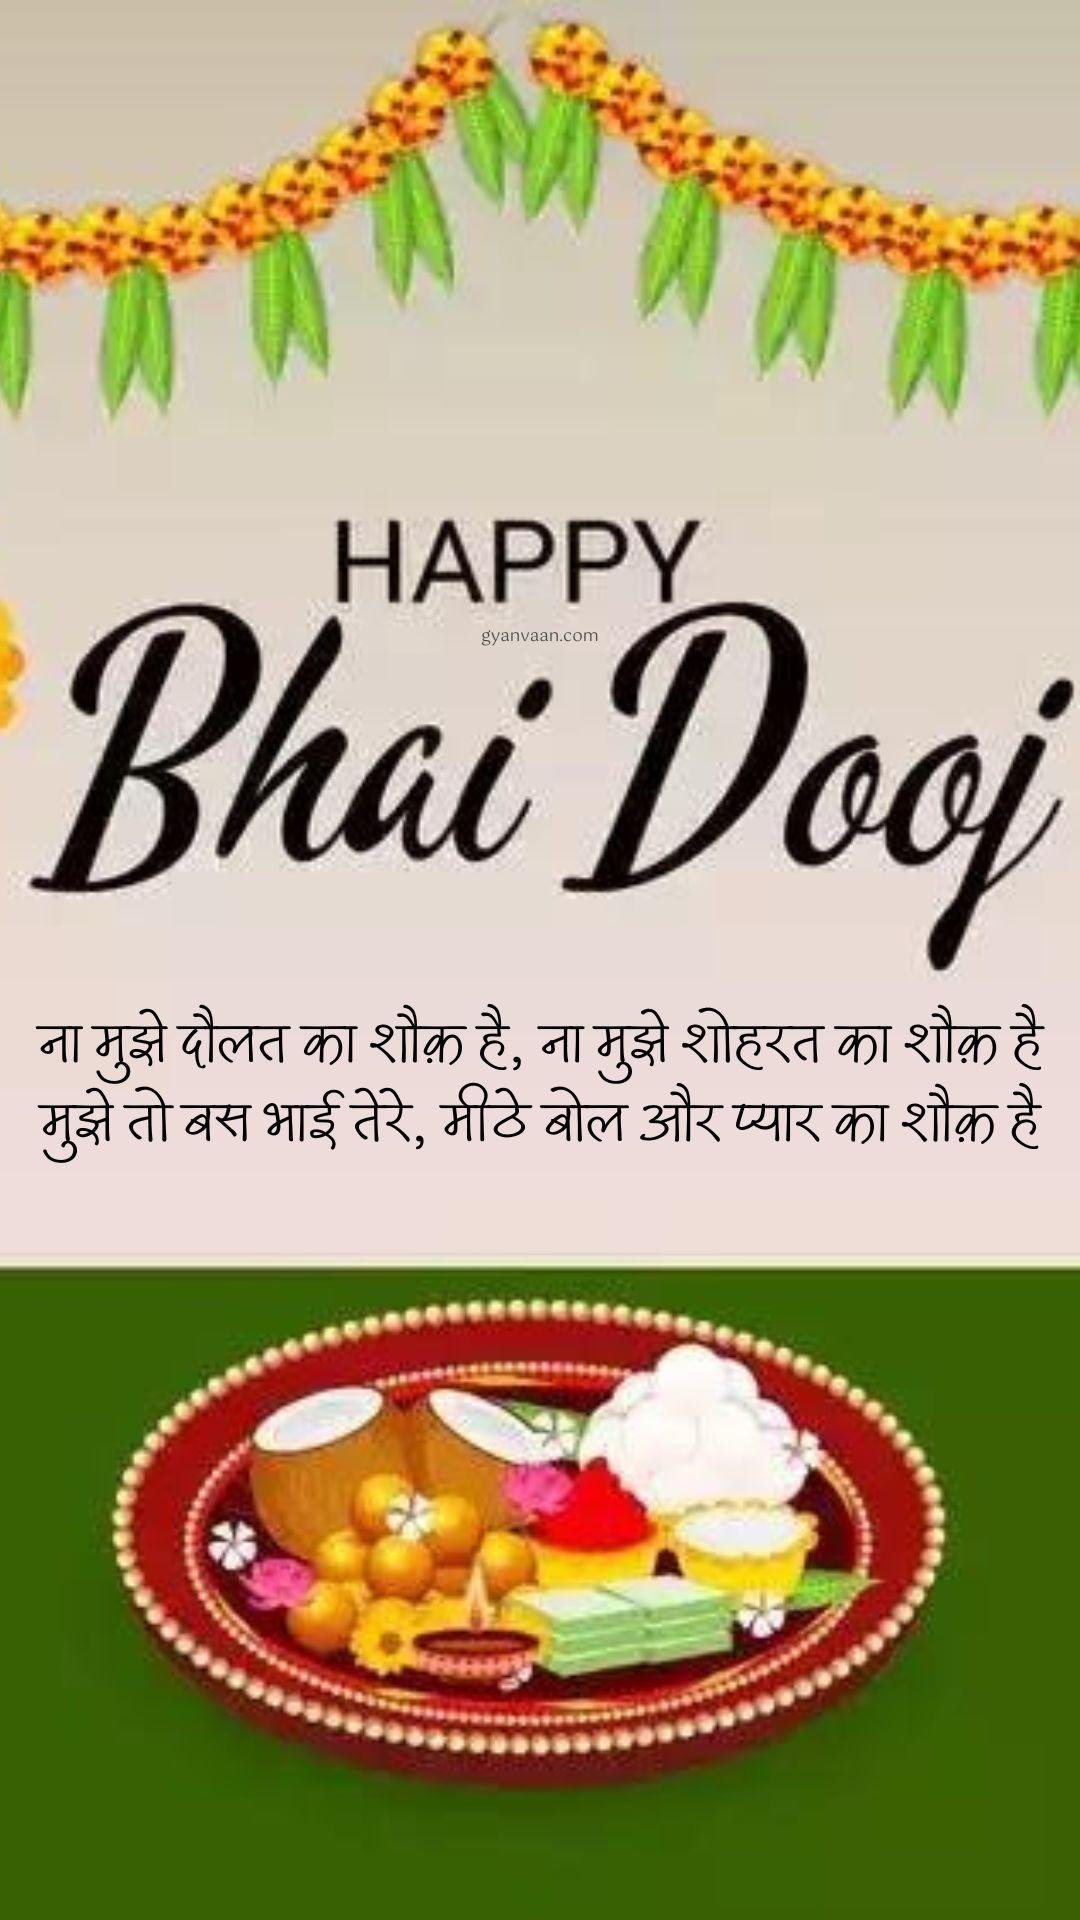 Happy Bhai Dooj Wishes In Hindi With Quotes Status Shubhkamnaye And Messages For Mobile 19 - Bhai Dooj Wishes In Hindi